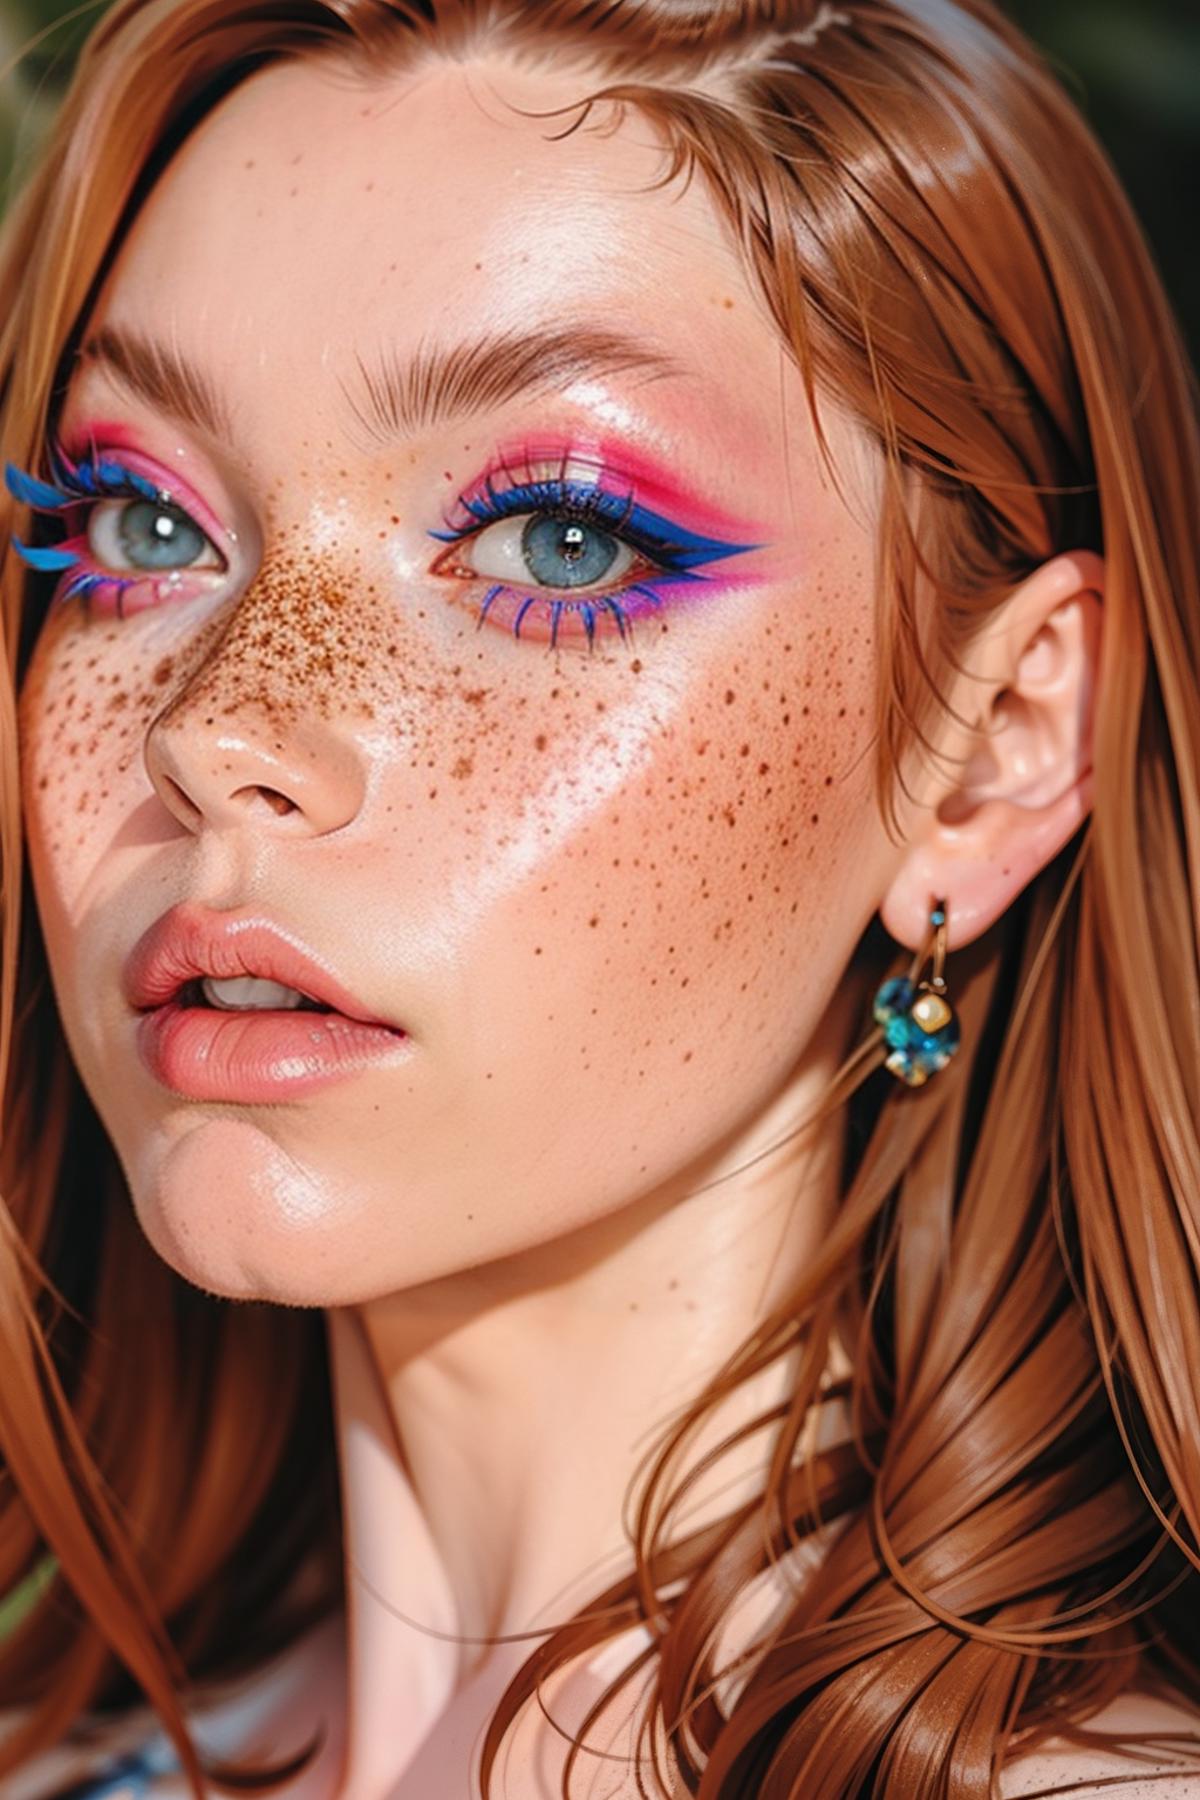 A woman with freckles and blue eyes wearing blue and pink makeup.